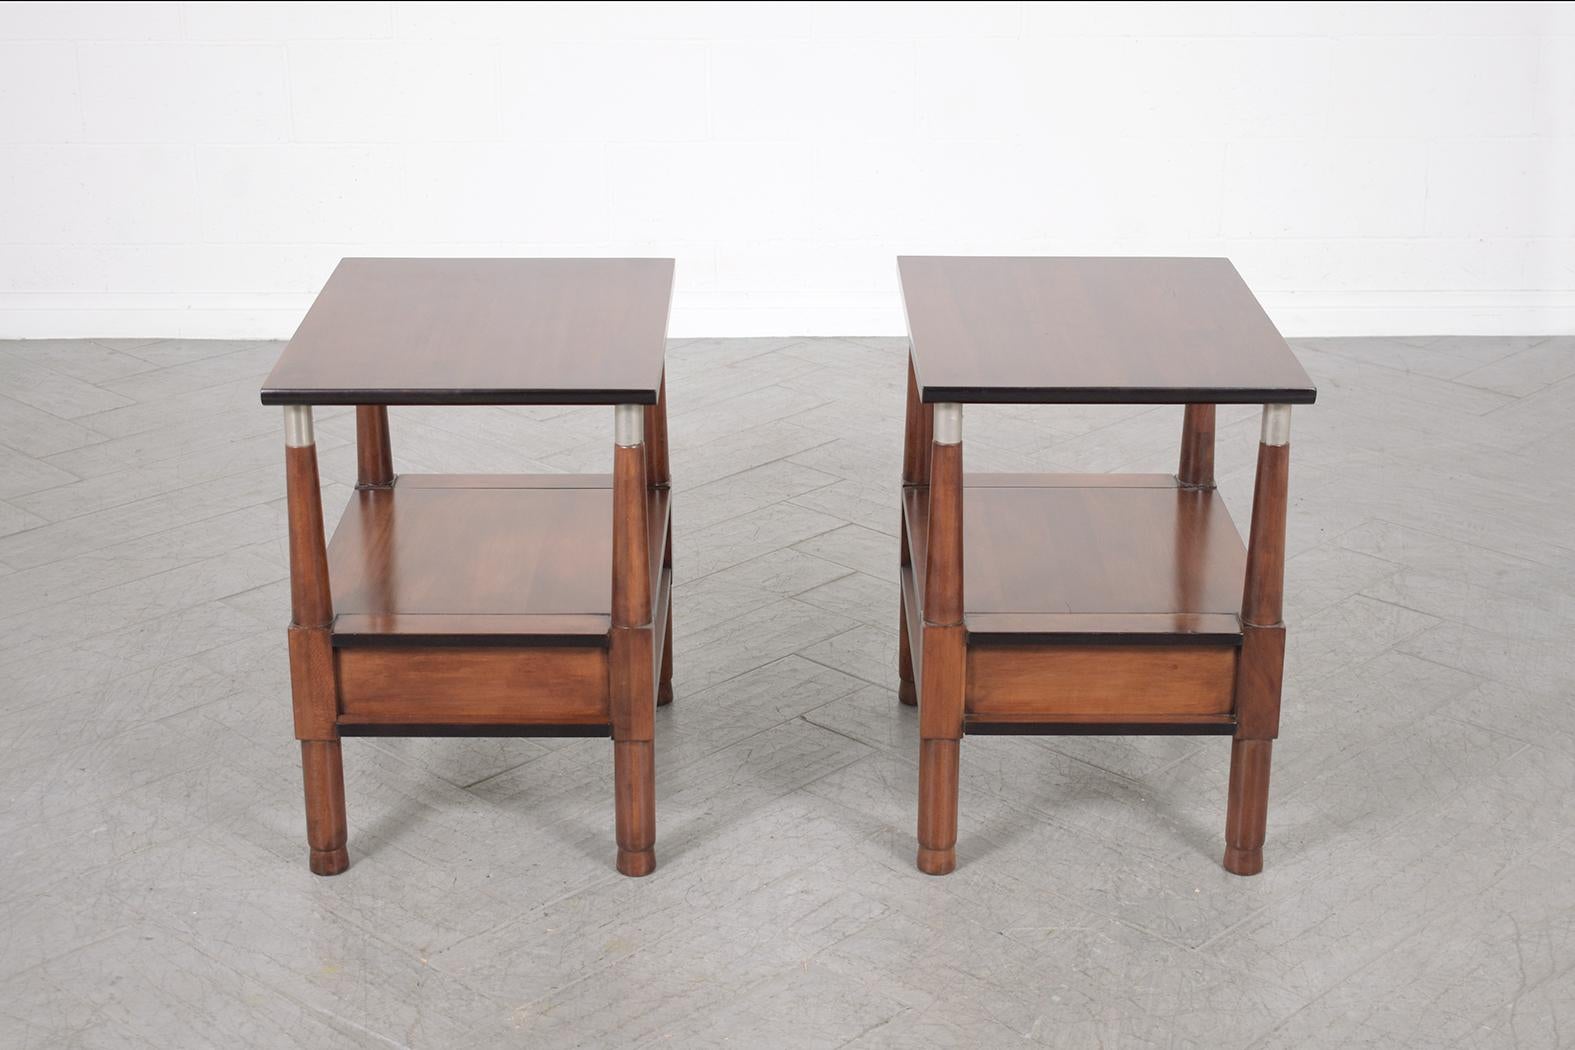 Refined Mid-Century Modern Nightstands: A Blend of Elegance and Functionality 3